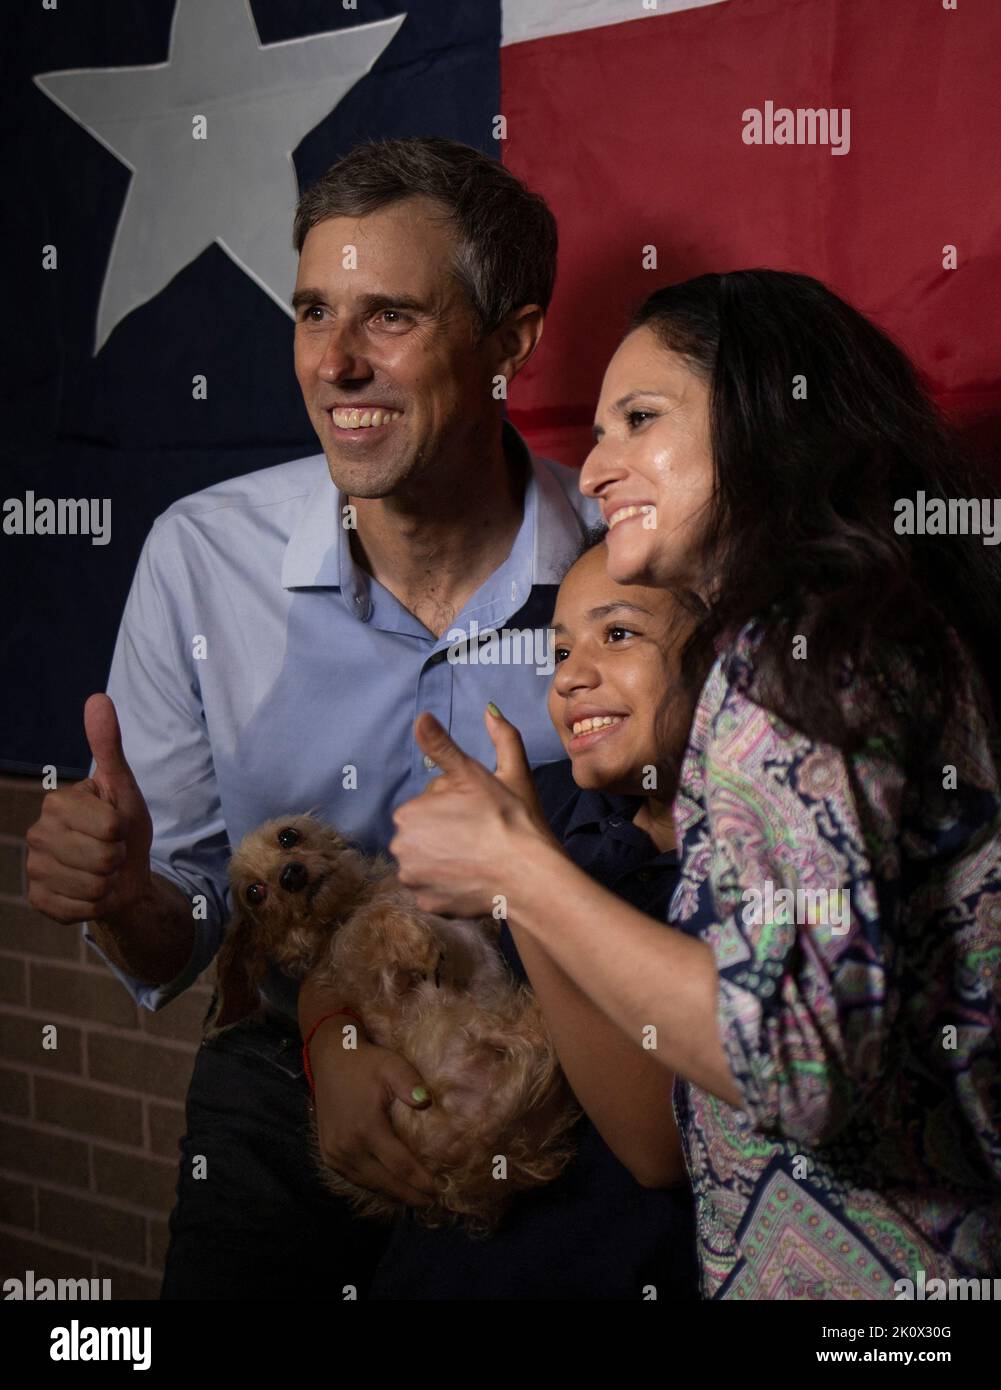 Texas Democratic gubernatorial candidate and former U.S. congressman Beto O'Rourke poses for photographs with supporters during a campaign event in Houston, Texas, U.S. September 13, 2022. REUTERS/Adrees Latif Stock Photo